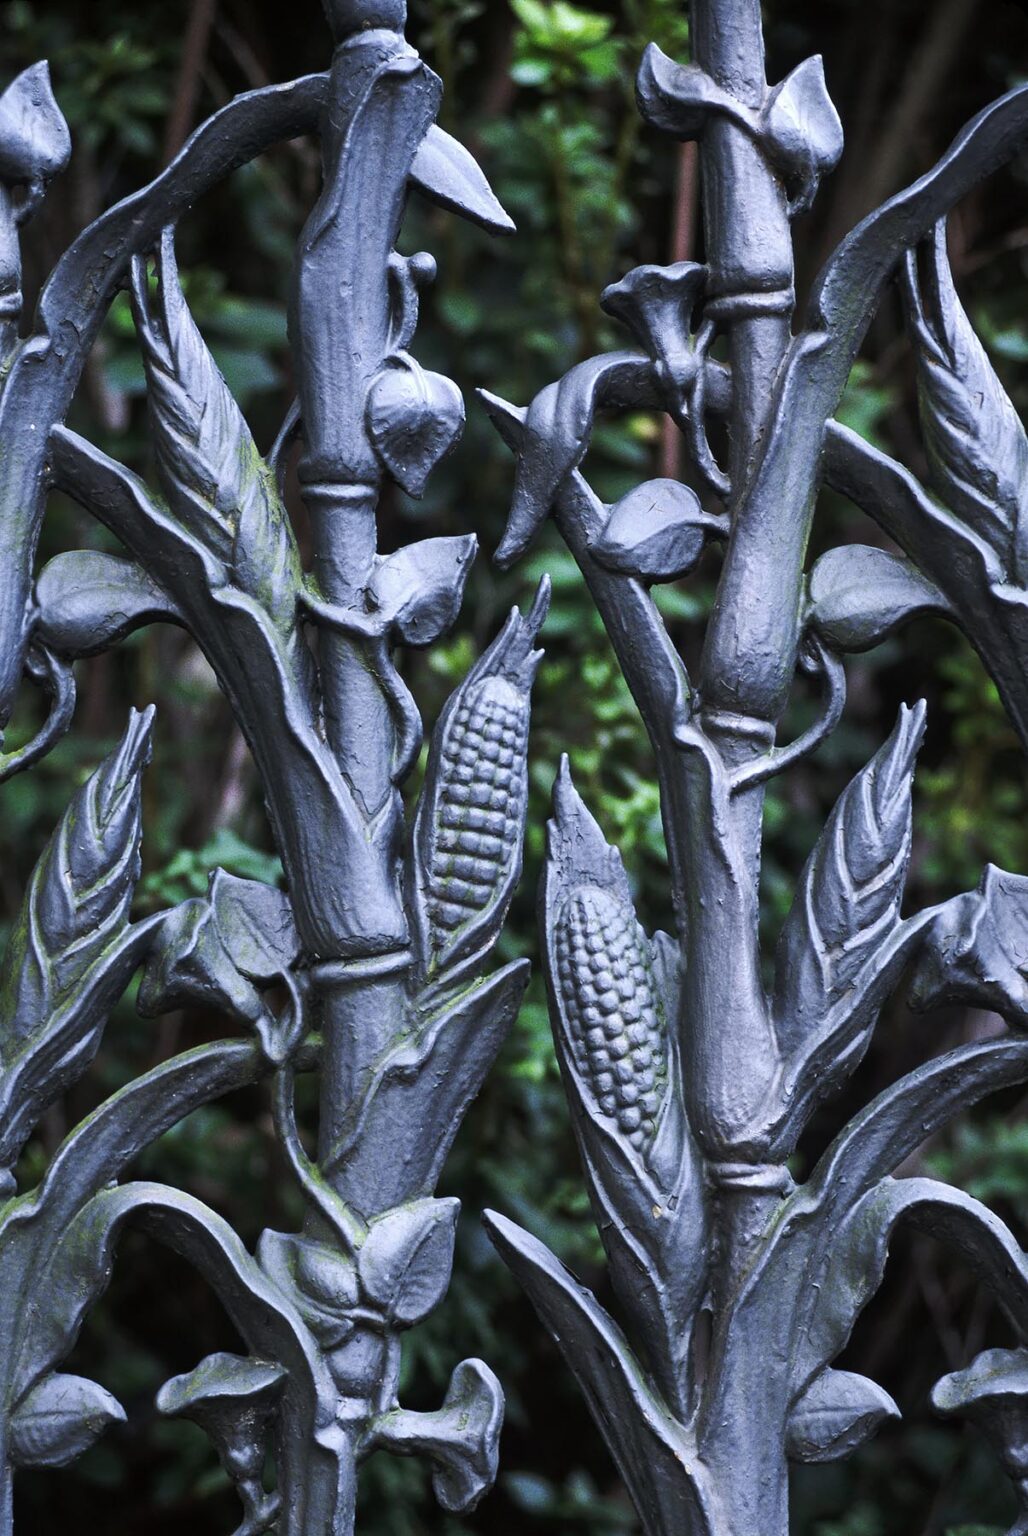 The famous CORNSTALK FENCE of COLONEL SHORT'S VILLA in the GARDEN DISTRICT of NEW ORLEANS